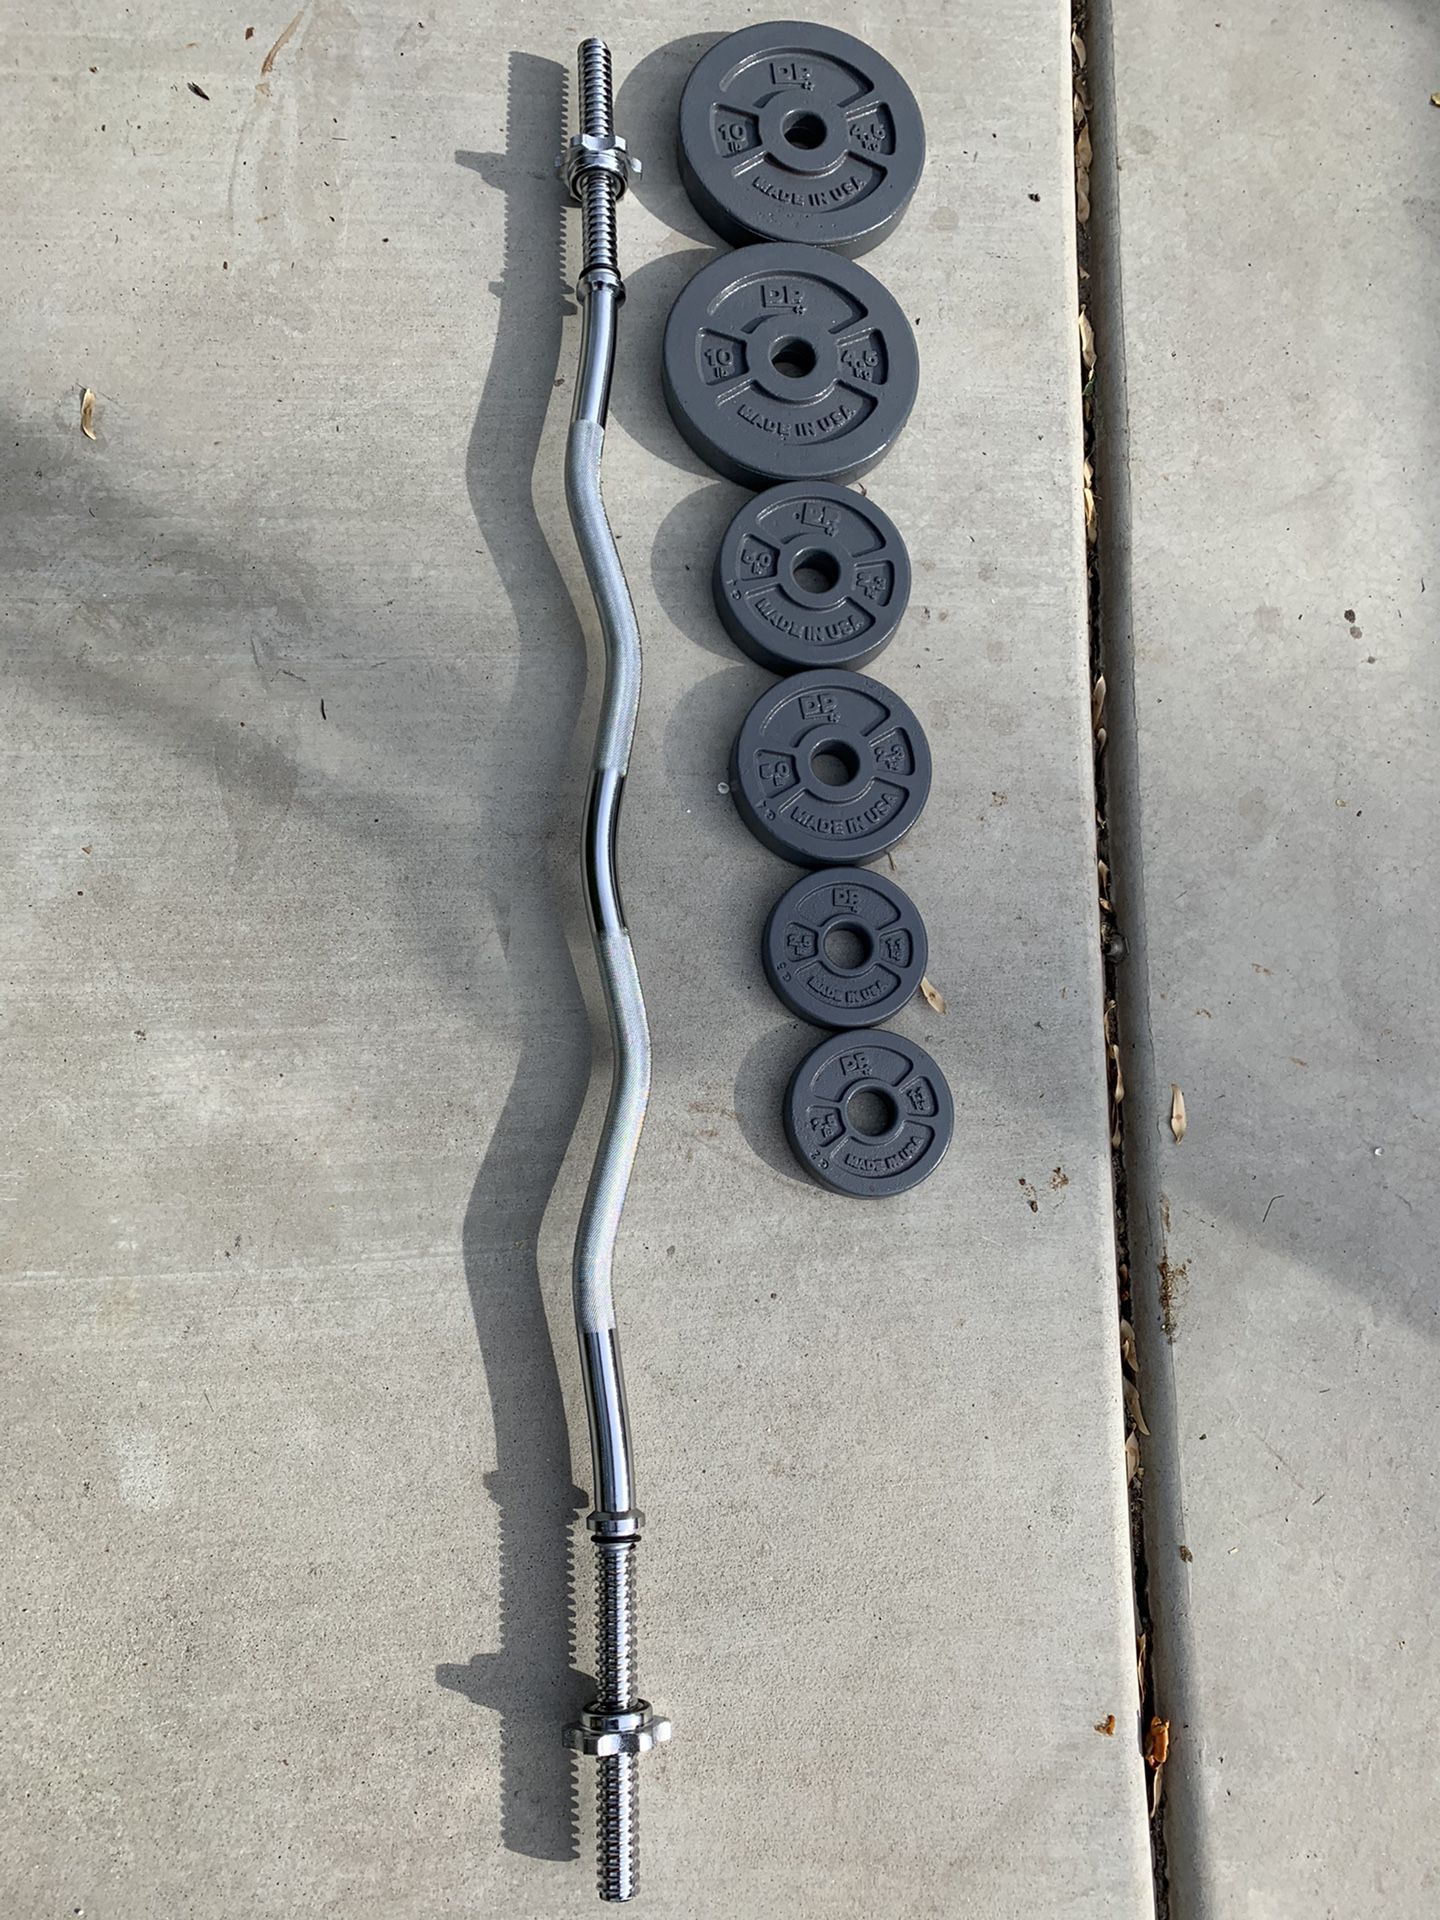 New Curl Bar with 35 pounds of weights